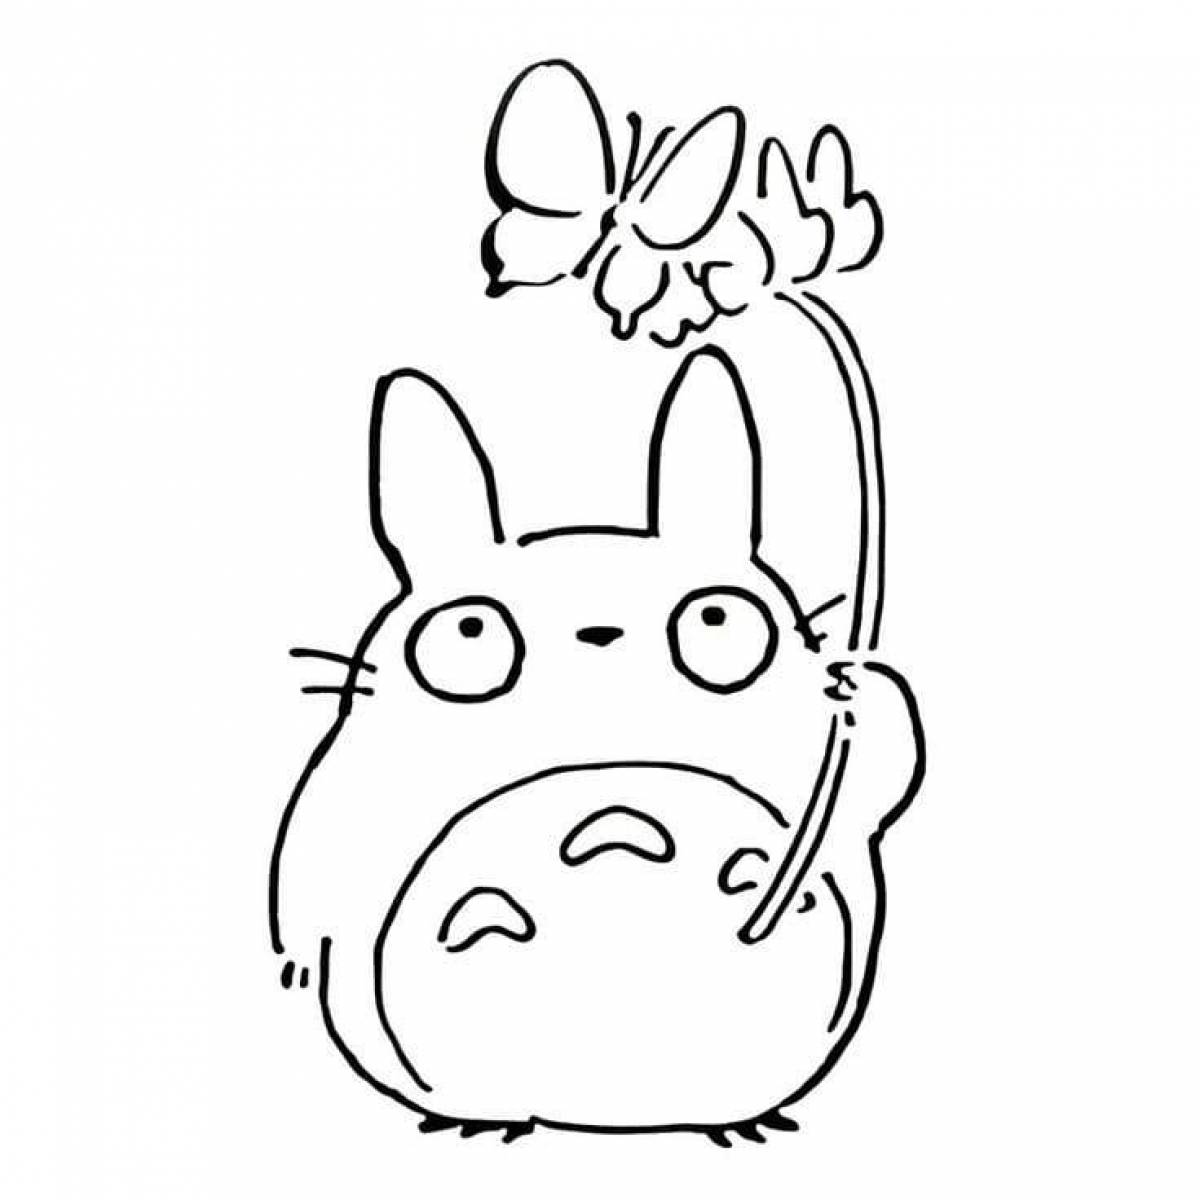 Amazing totoro coloring page